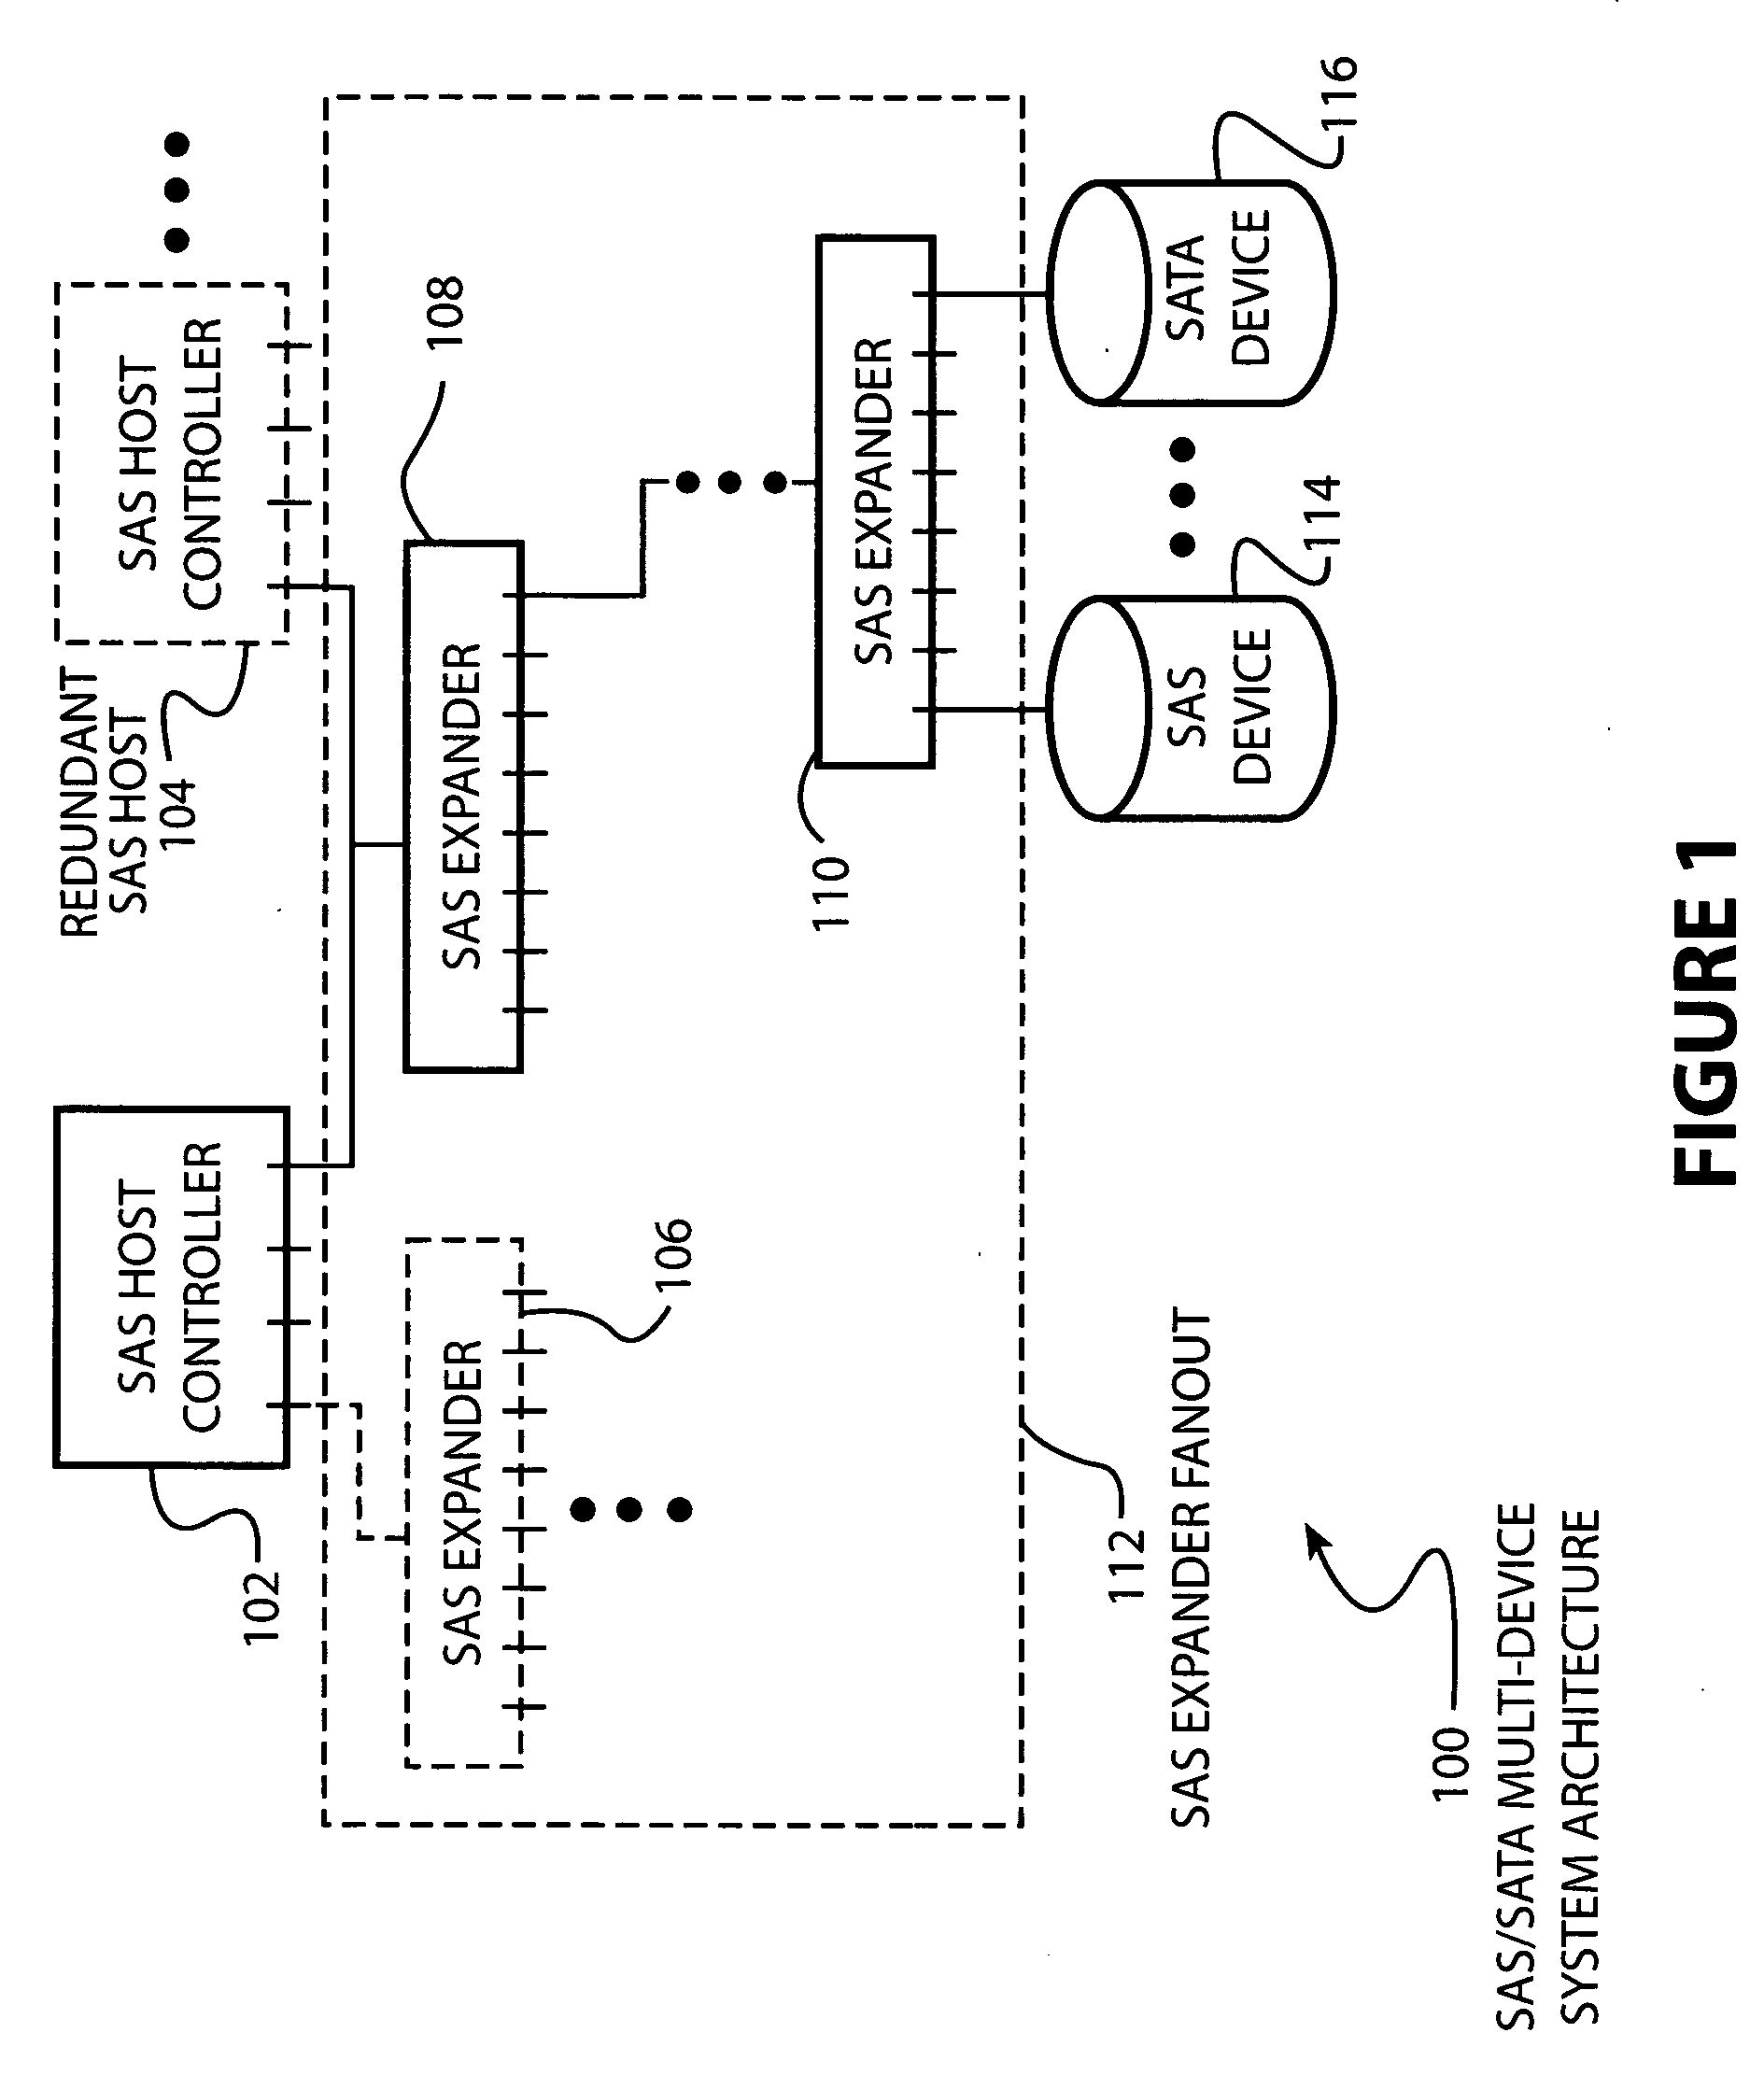 Circuit and method to provide configuration of serial ATA queue depth versus number of devices